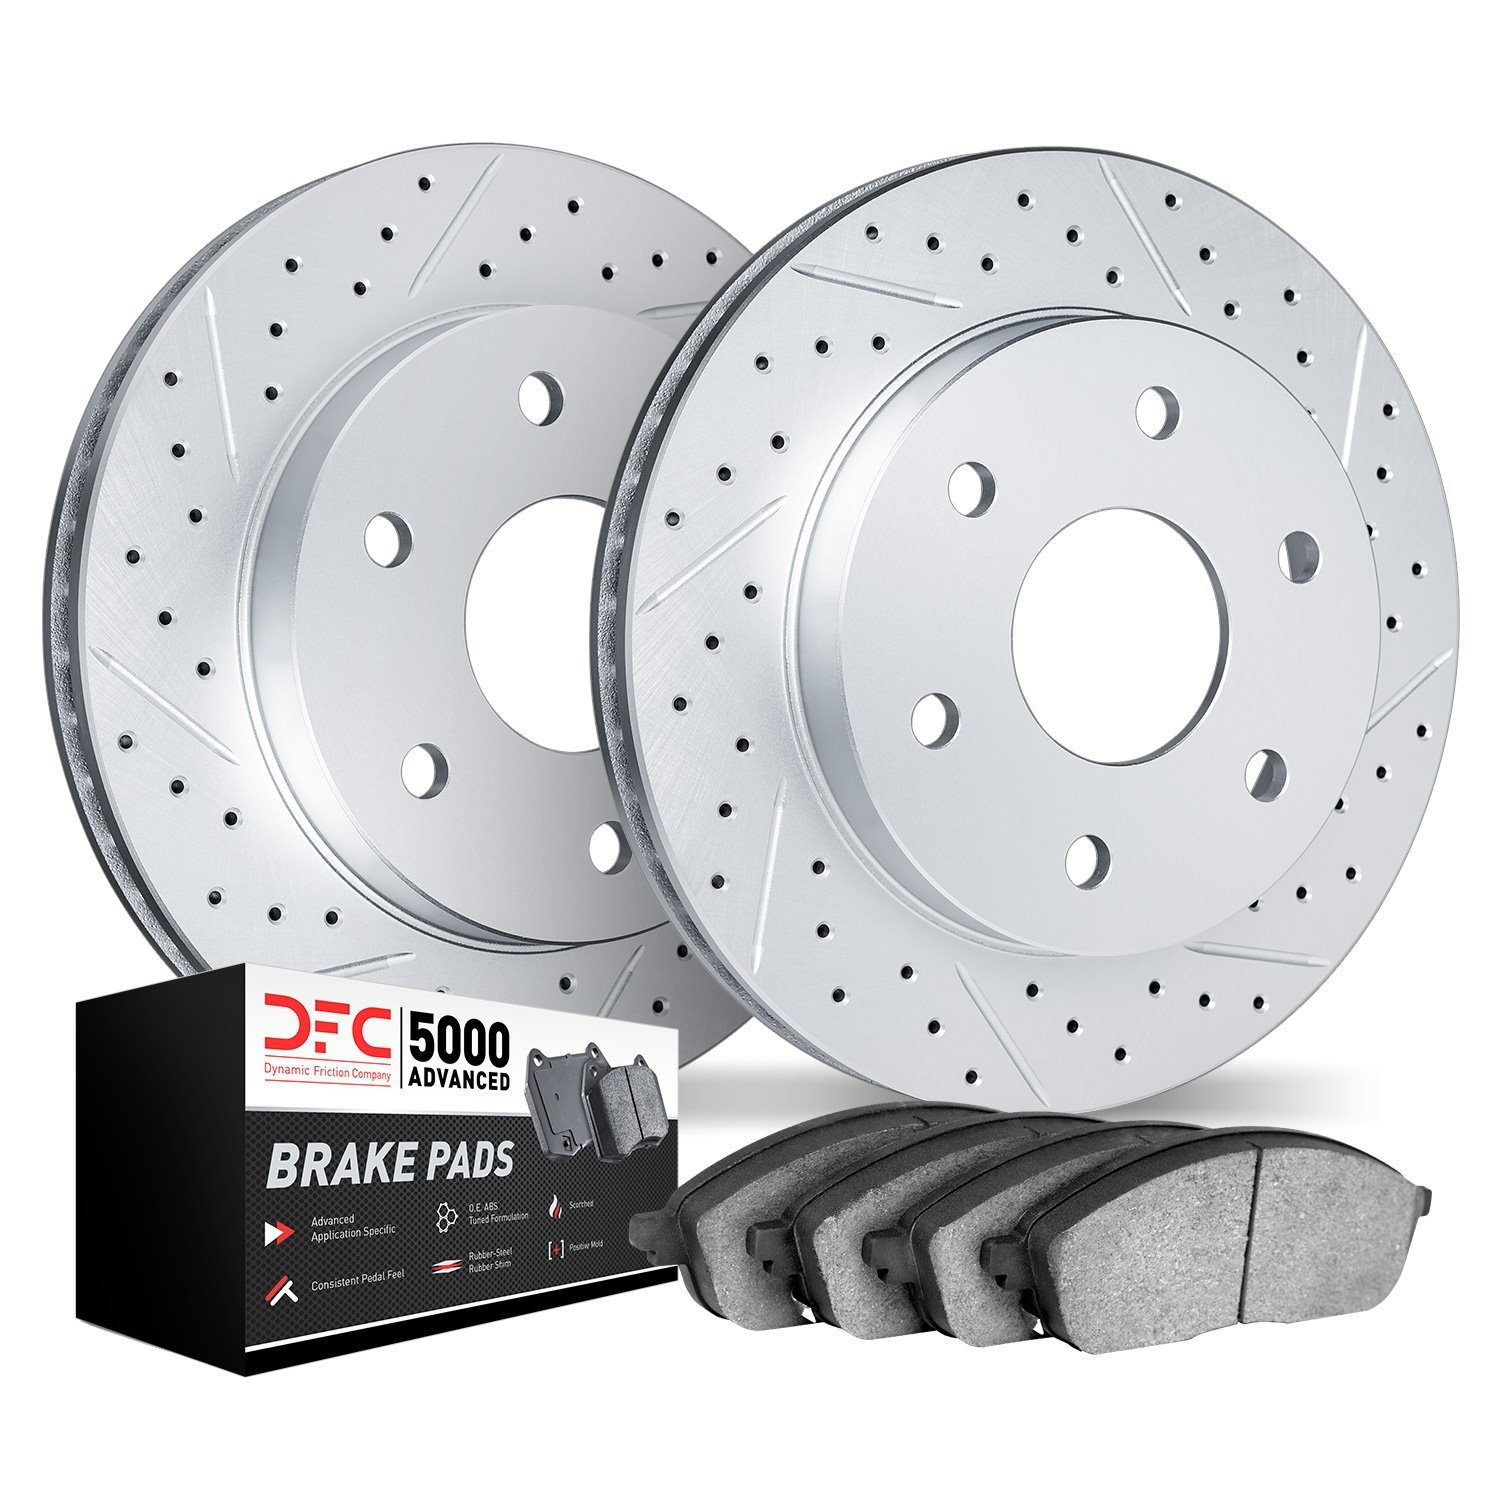 2502-40019 Geoperformance Drilled/Slotted Rotors w/5000 Advanced Brake Pads Kit, 2002-2006 Multiple Makes/Models, Position: Rear